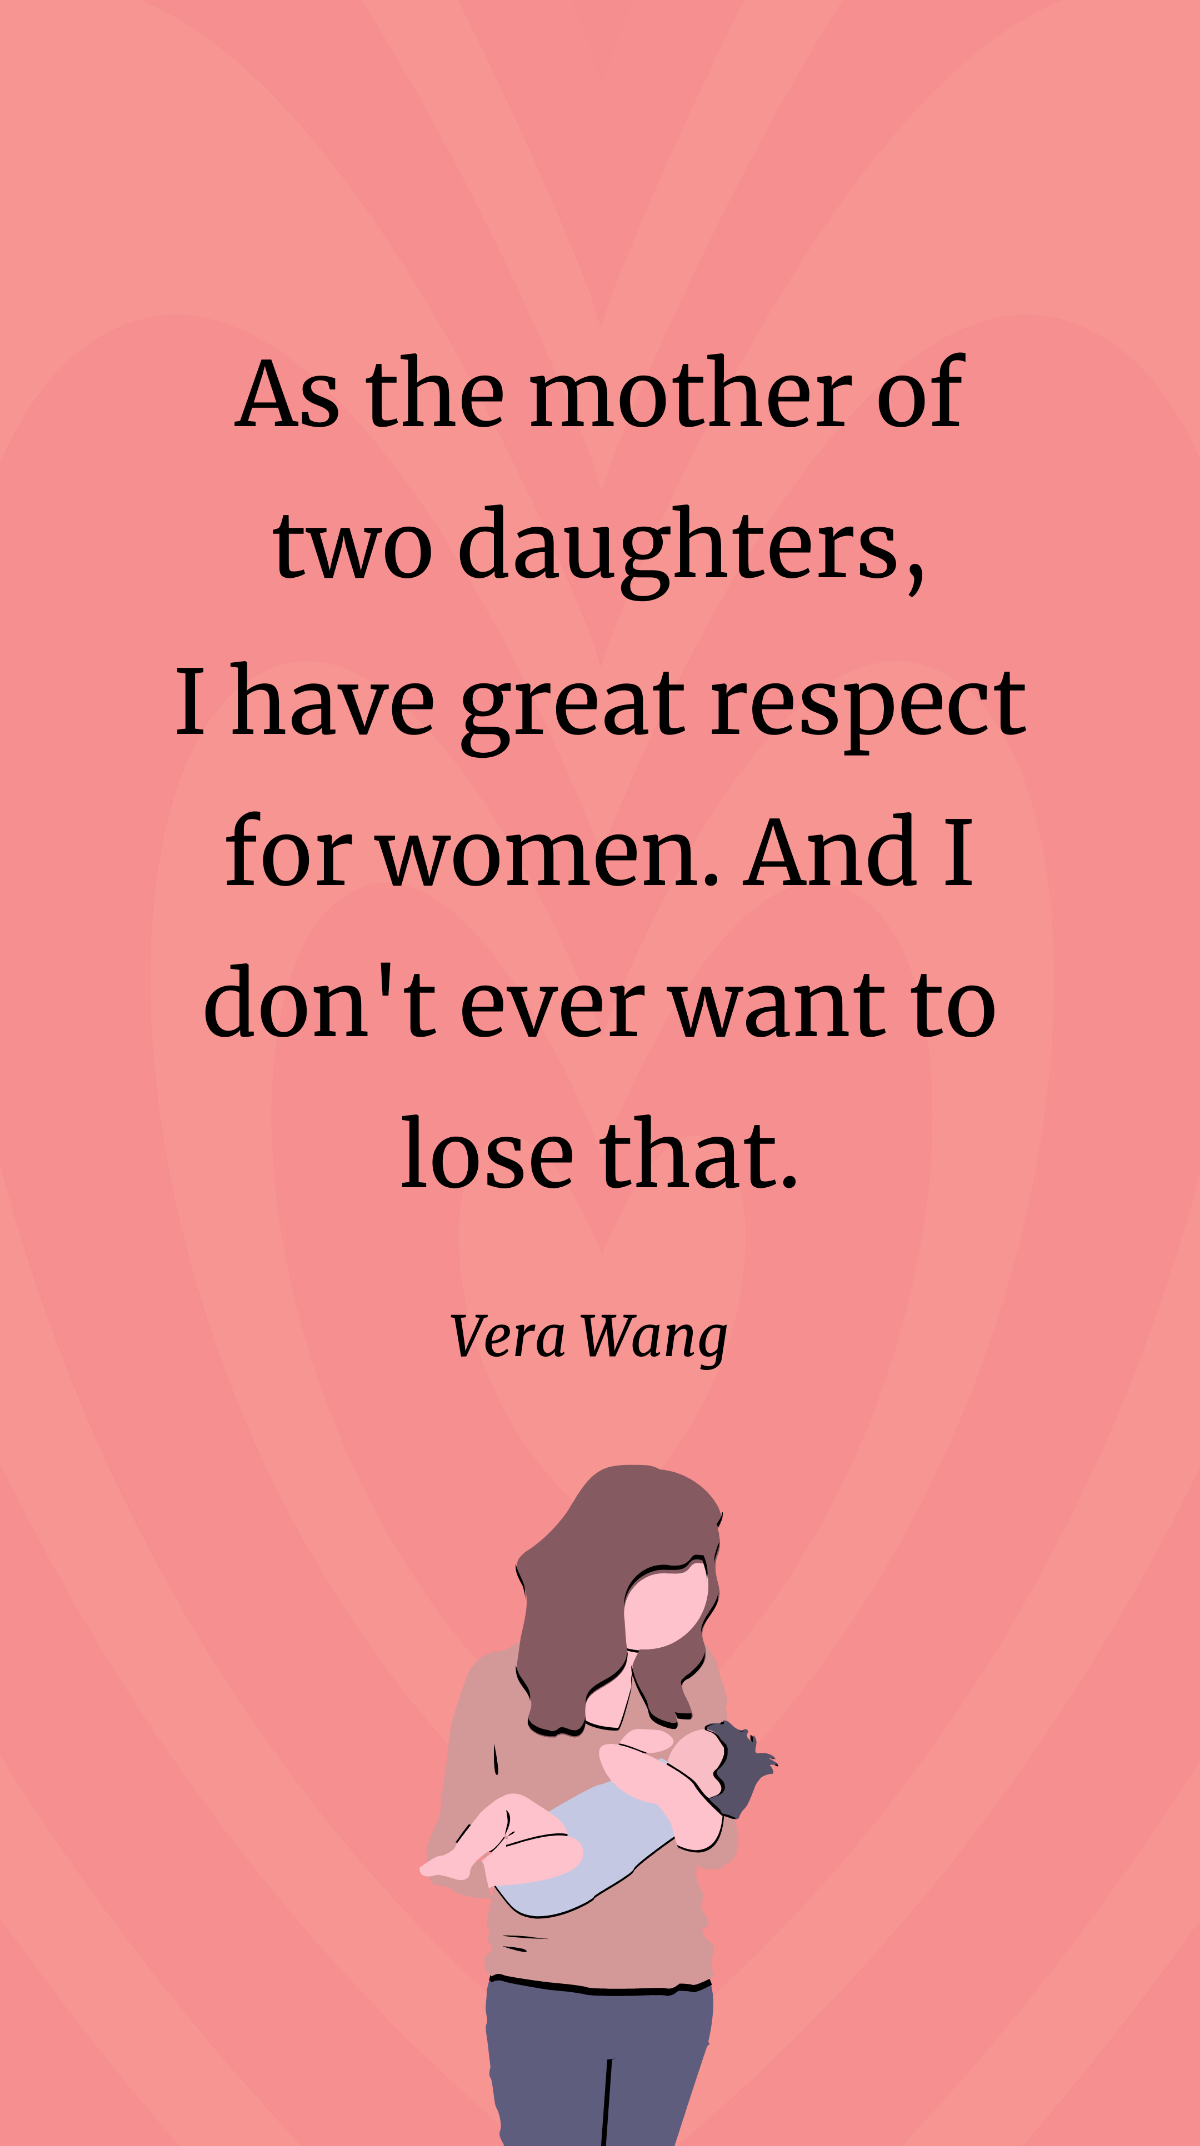 Vera Wang- As the mother of two daughters, I have great respect for women. And I don't ever want to lose that. Template